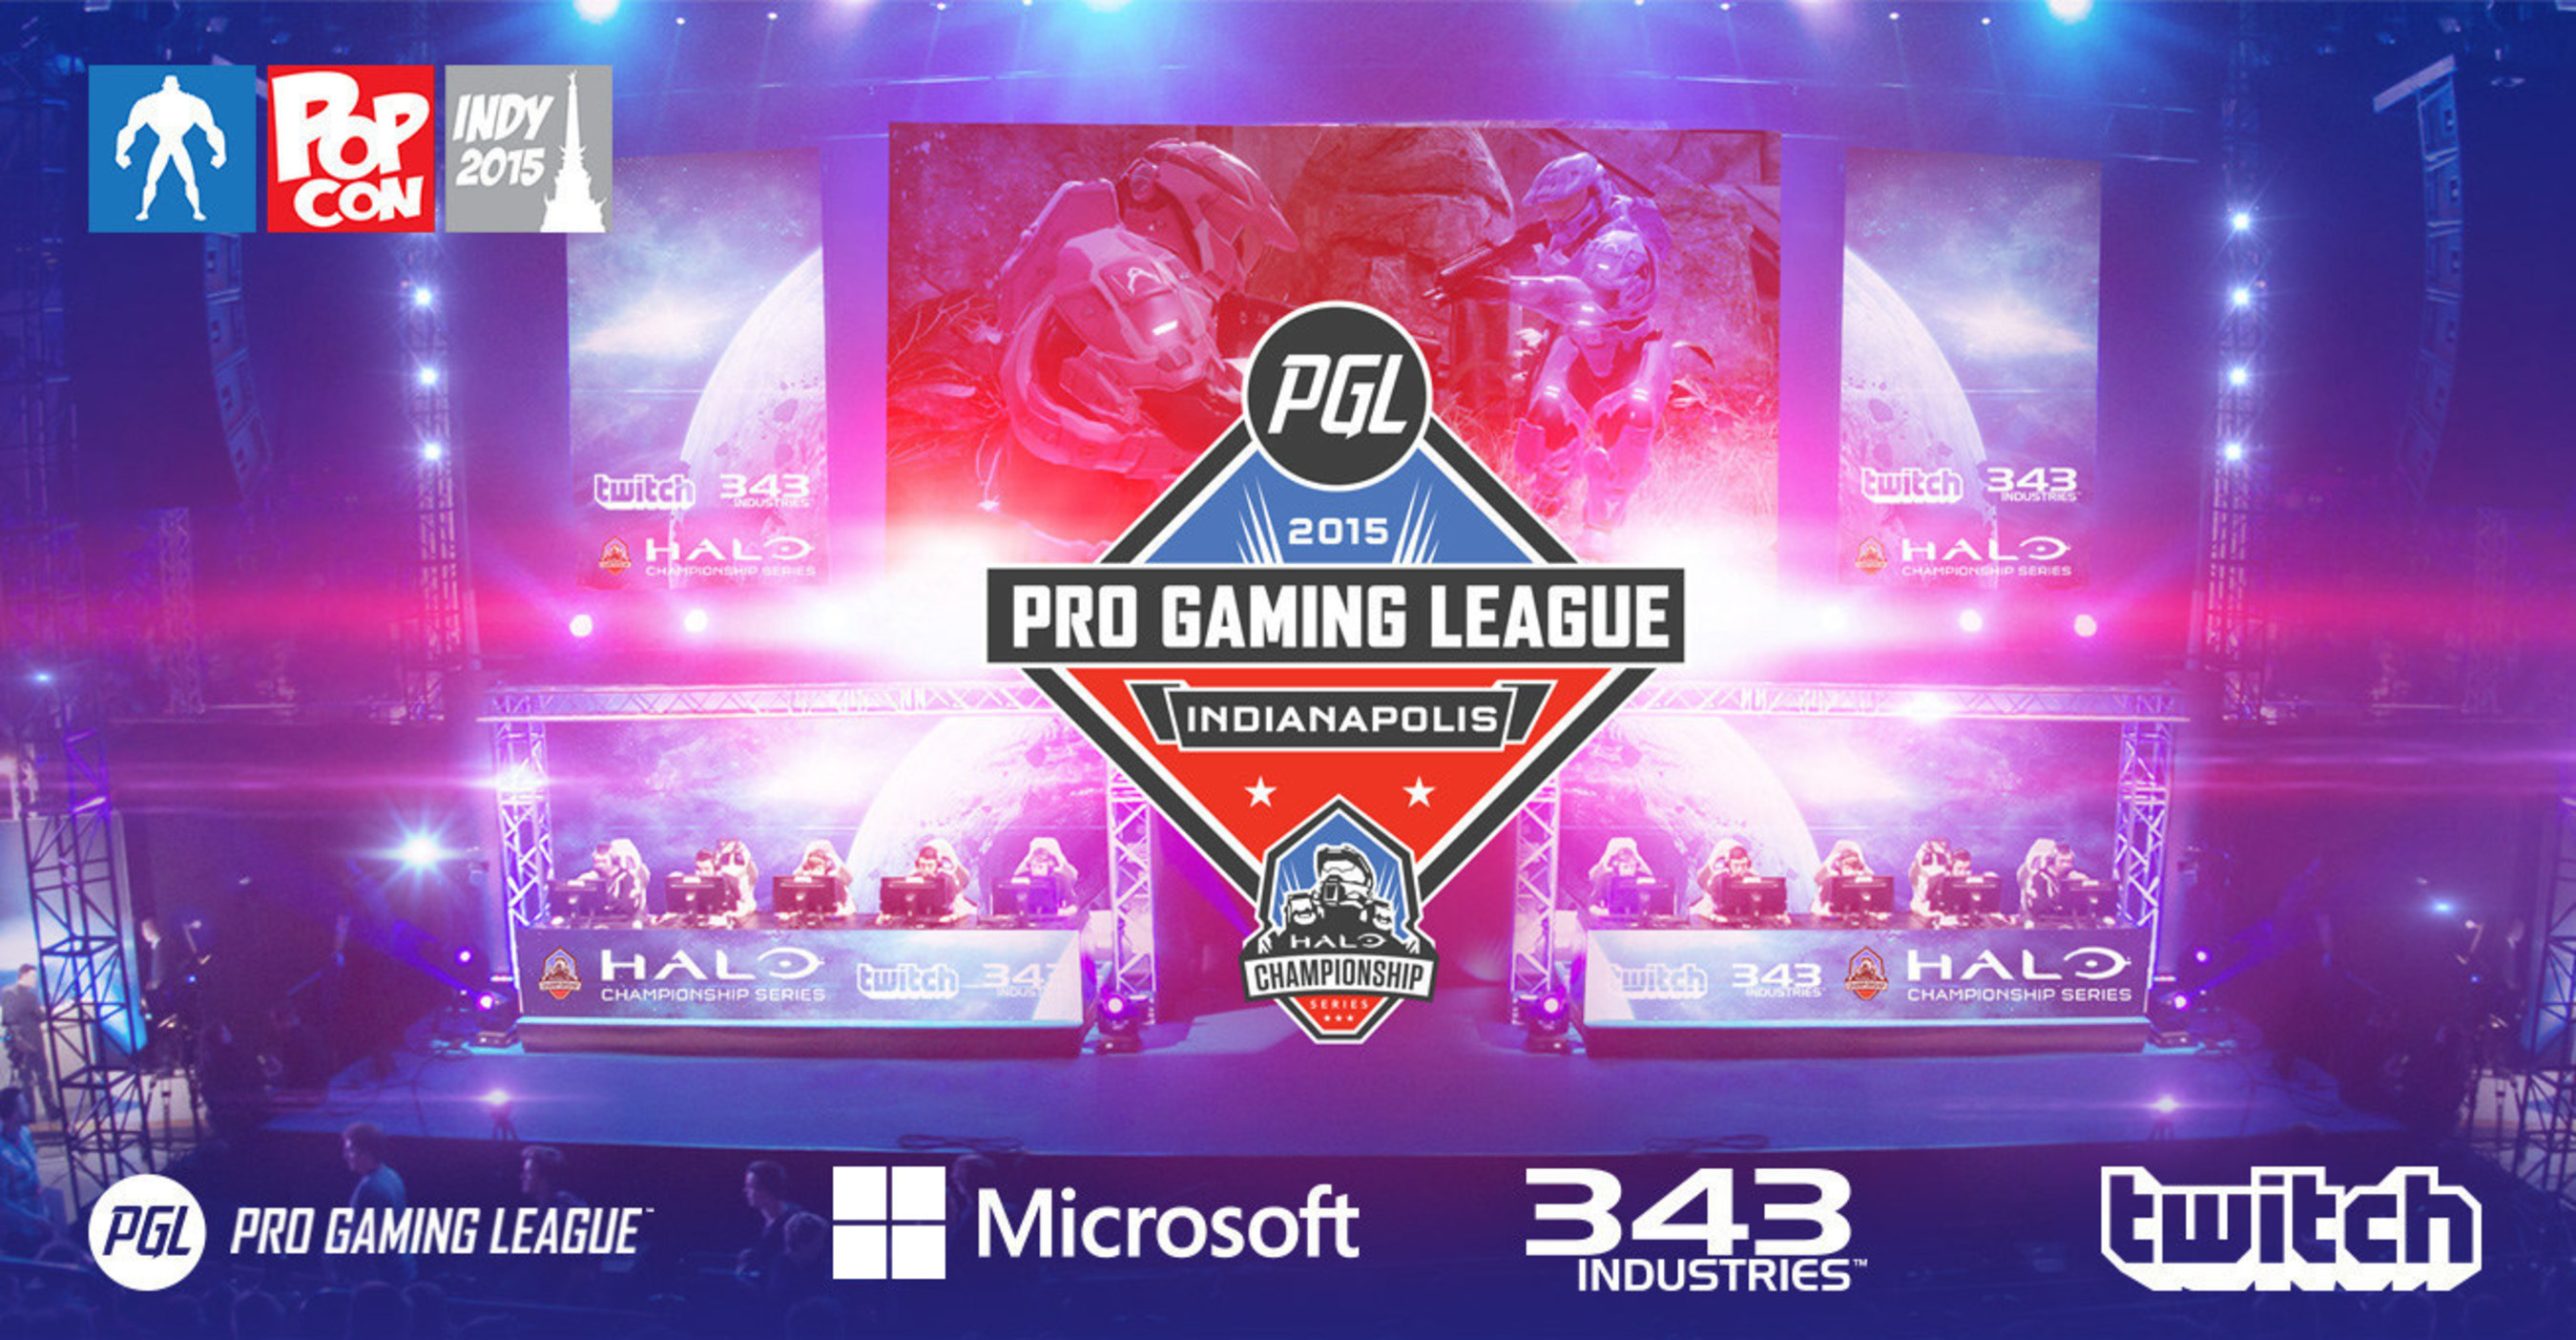 Gamers Descend Upon Indianapolis to Compete for Pro Gaming League Halo Championship Series With $50,000 Cash Prize